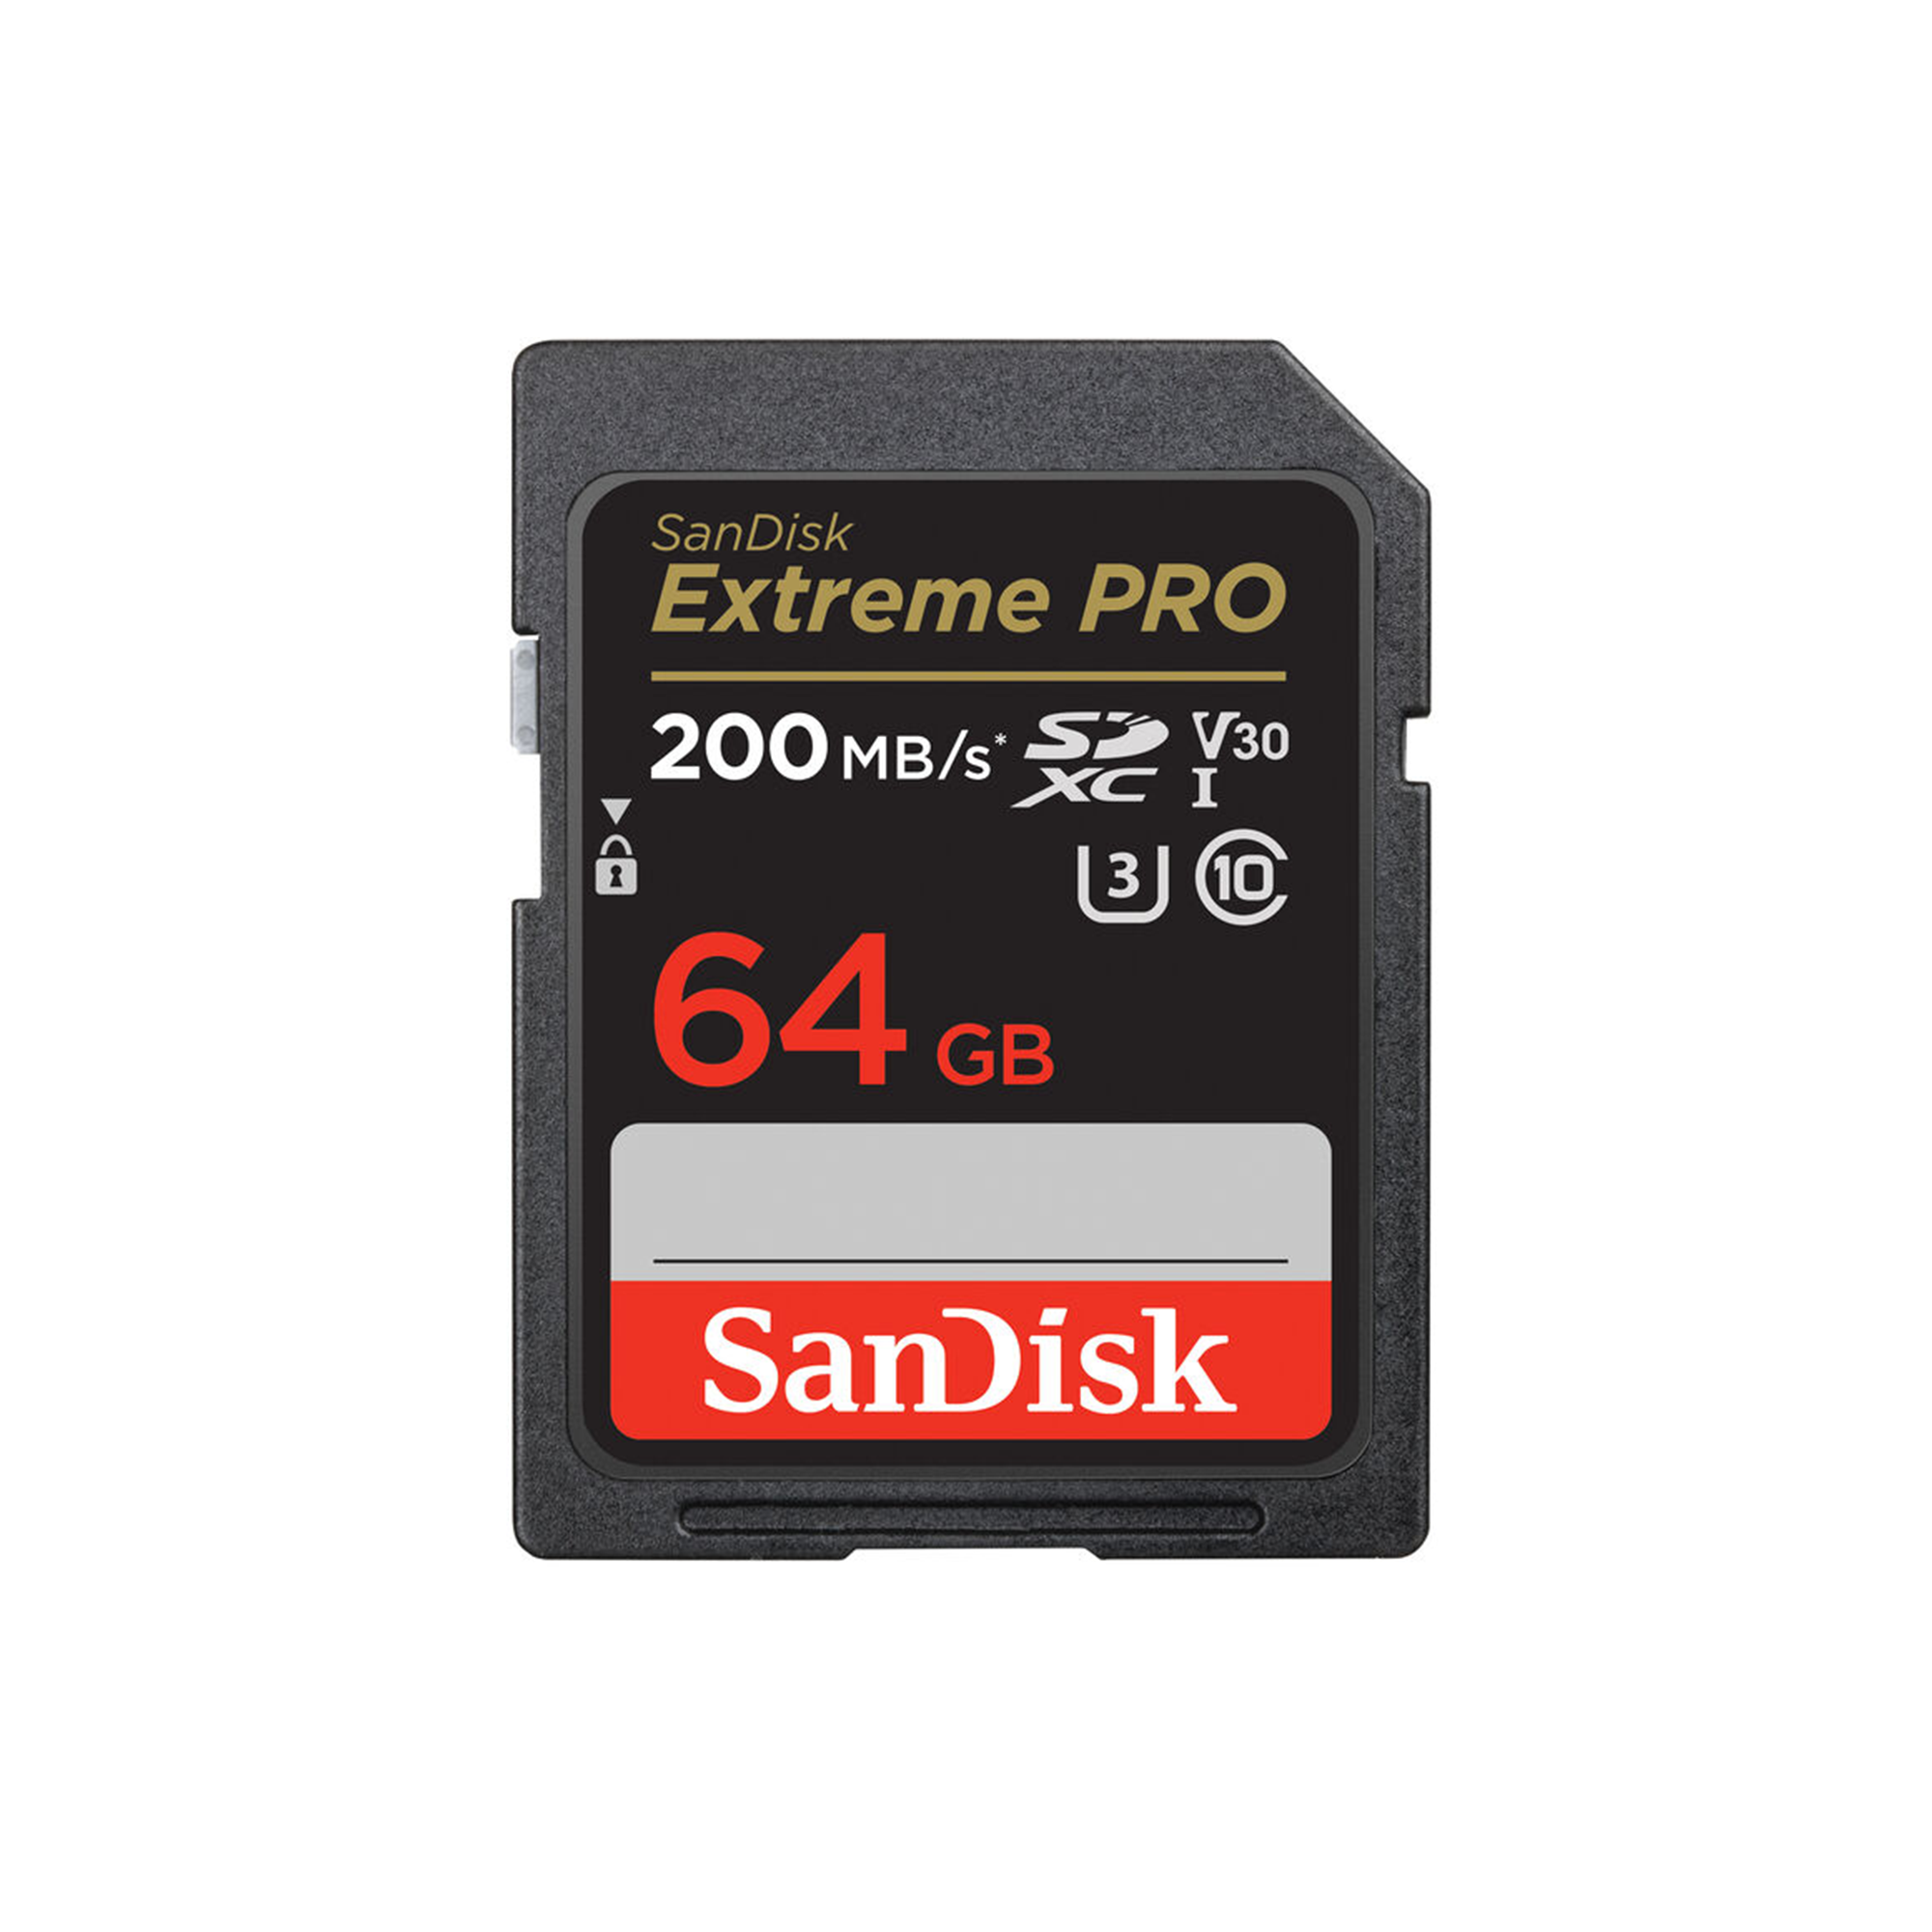 SanDisk Extreme Pro SD UHS I 64GB Card for 4K Video 200MB/s Read & 90MB/s Write